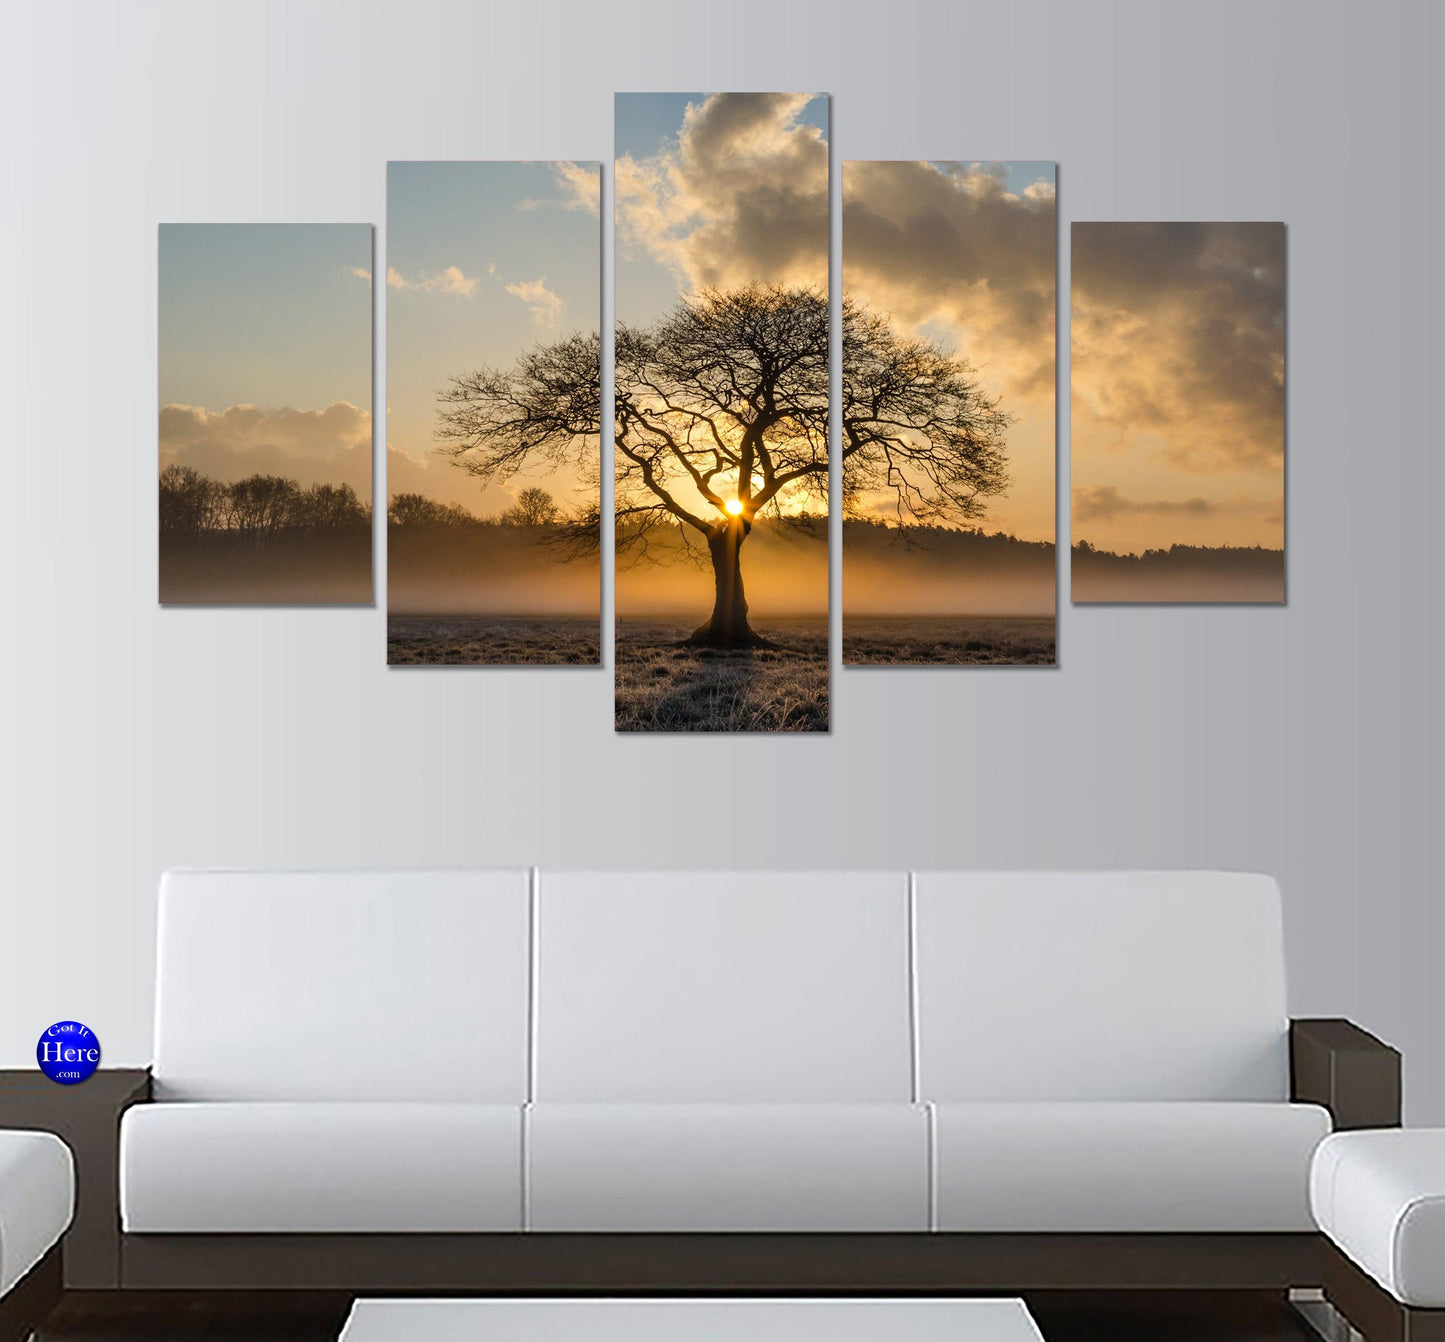 Autumn Tree In Misty Meadow 5 Panel Canvas Print Wall Art - GotItHere.com